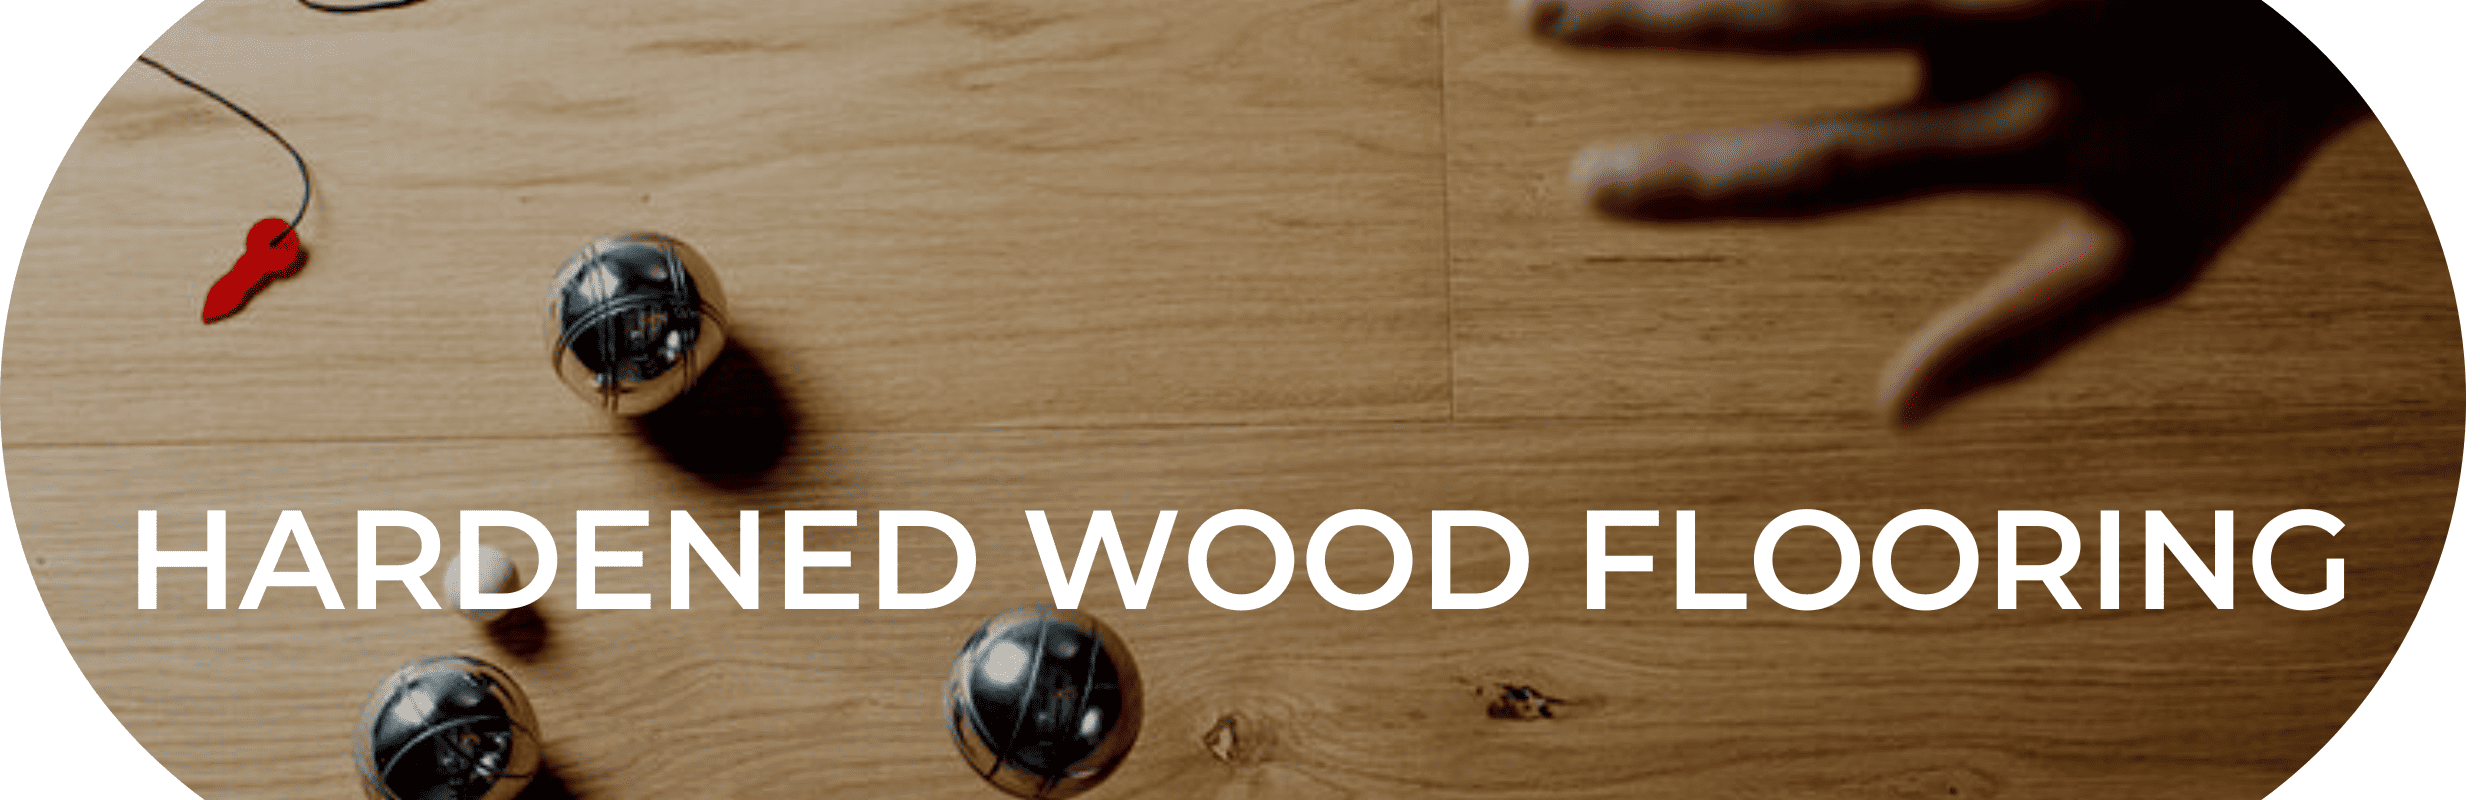 Valinge (now known as BJELIN) Hardened Wood Flooring - image of a child playing a game by throwing small but heavy metal toy balls onto a hardwood floor. The words hardened wood flooring are displayed prominently over the top of the photo